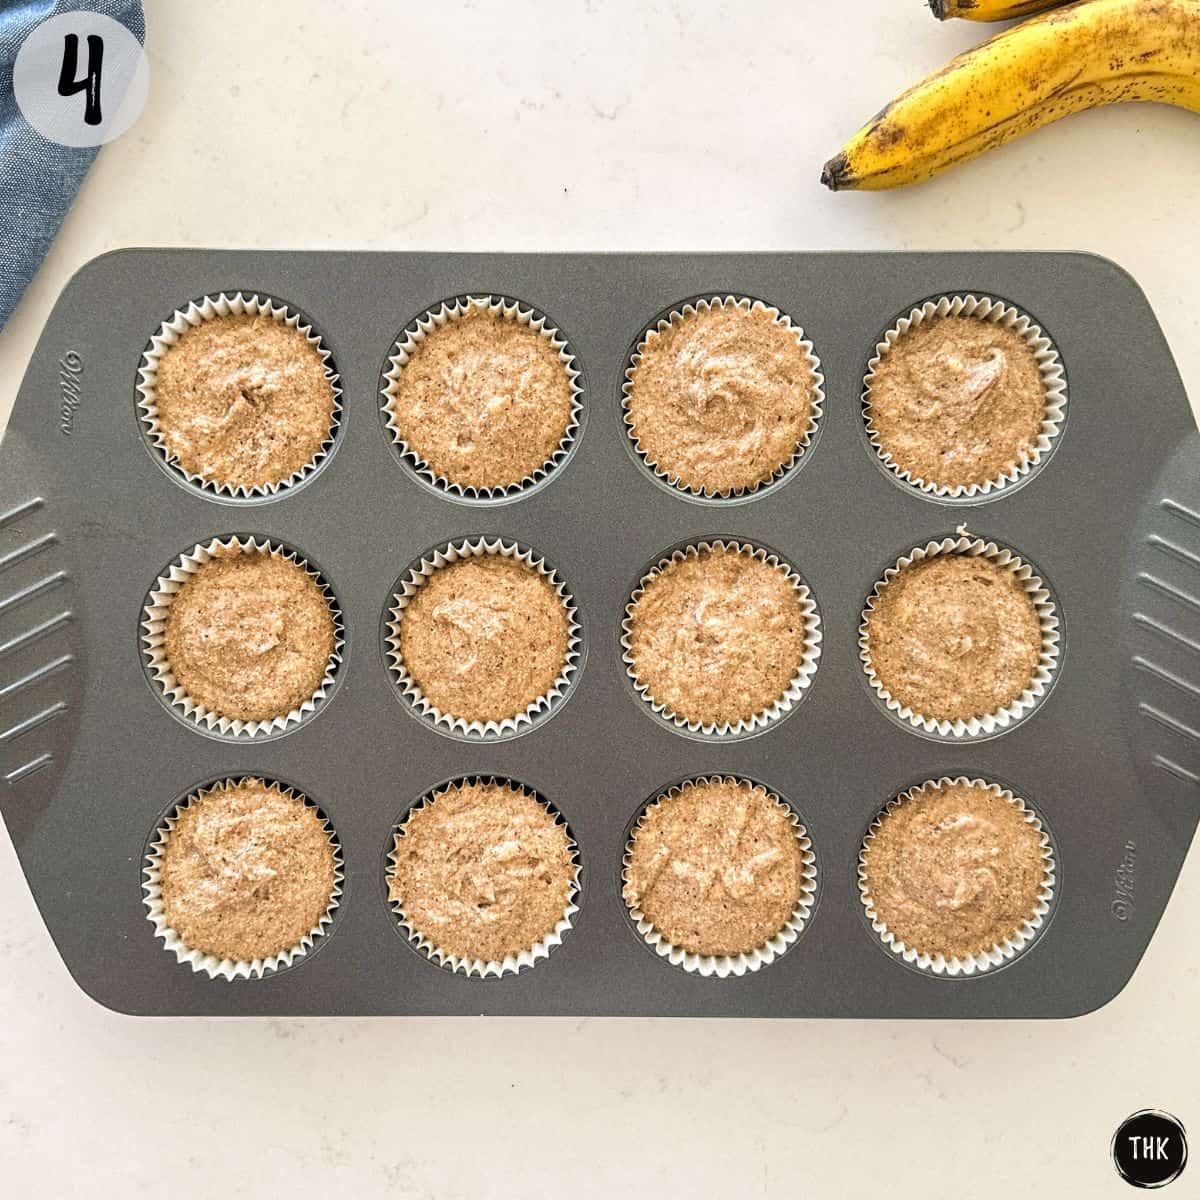 Muffin pan with batter inside before baking them.